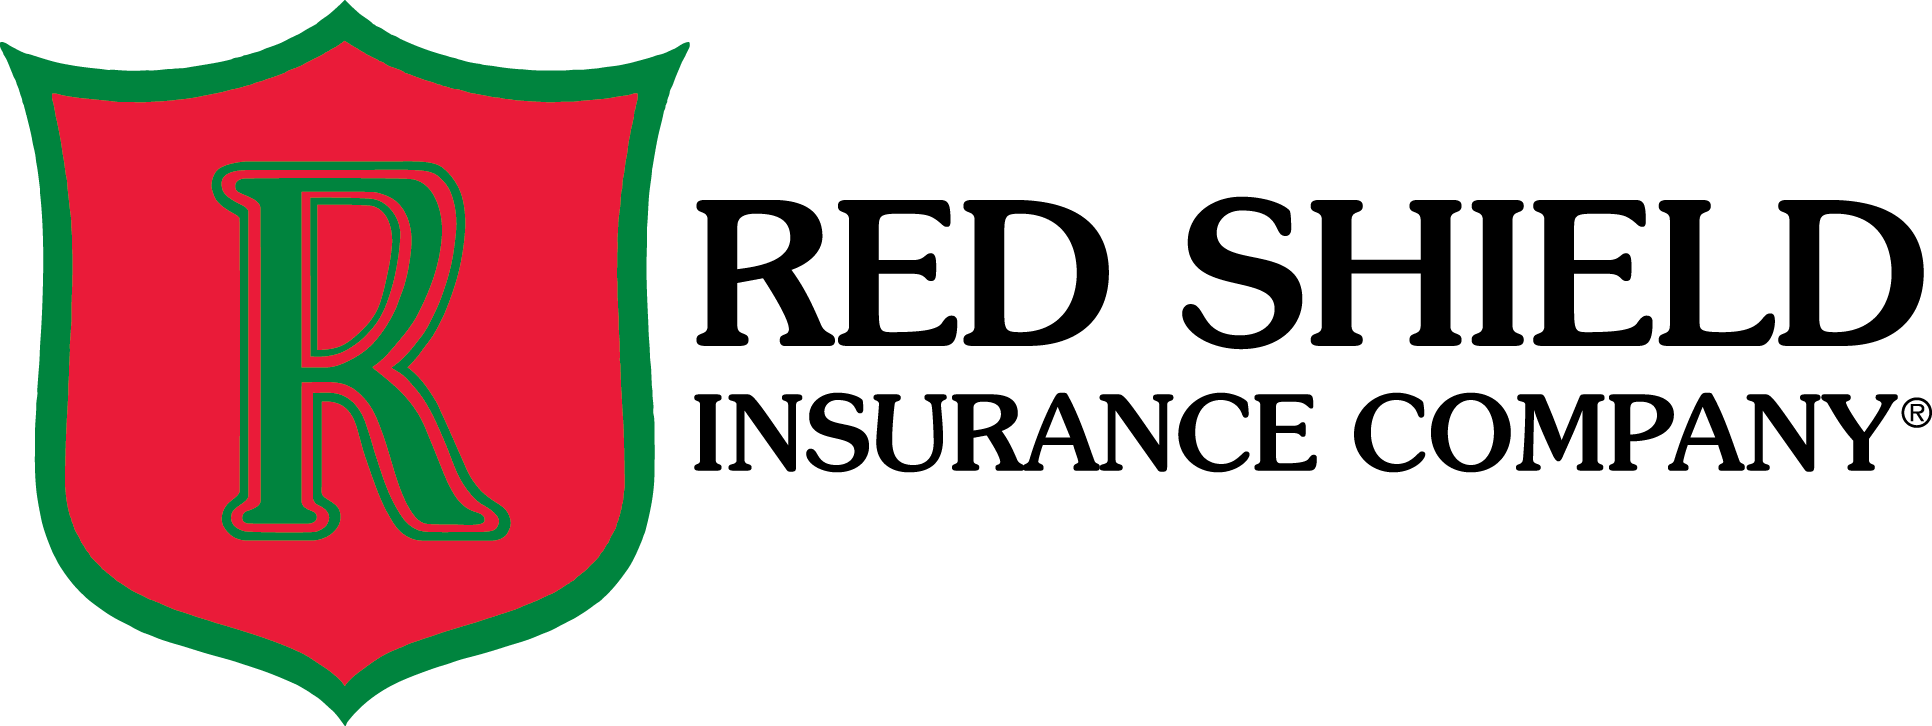 Green and Red Shield Company Logo - KKlub Members - Professional Insurance Agents Western Alliance